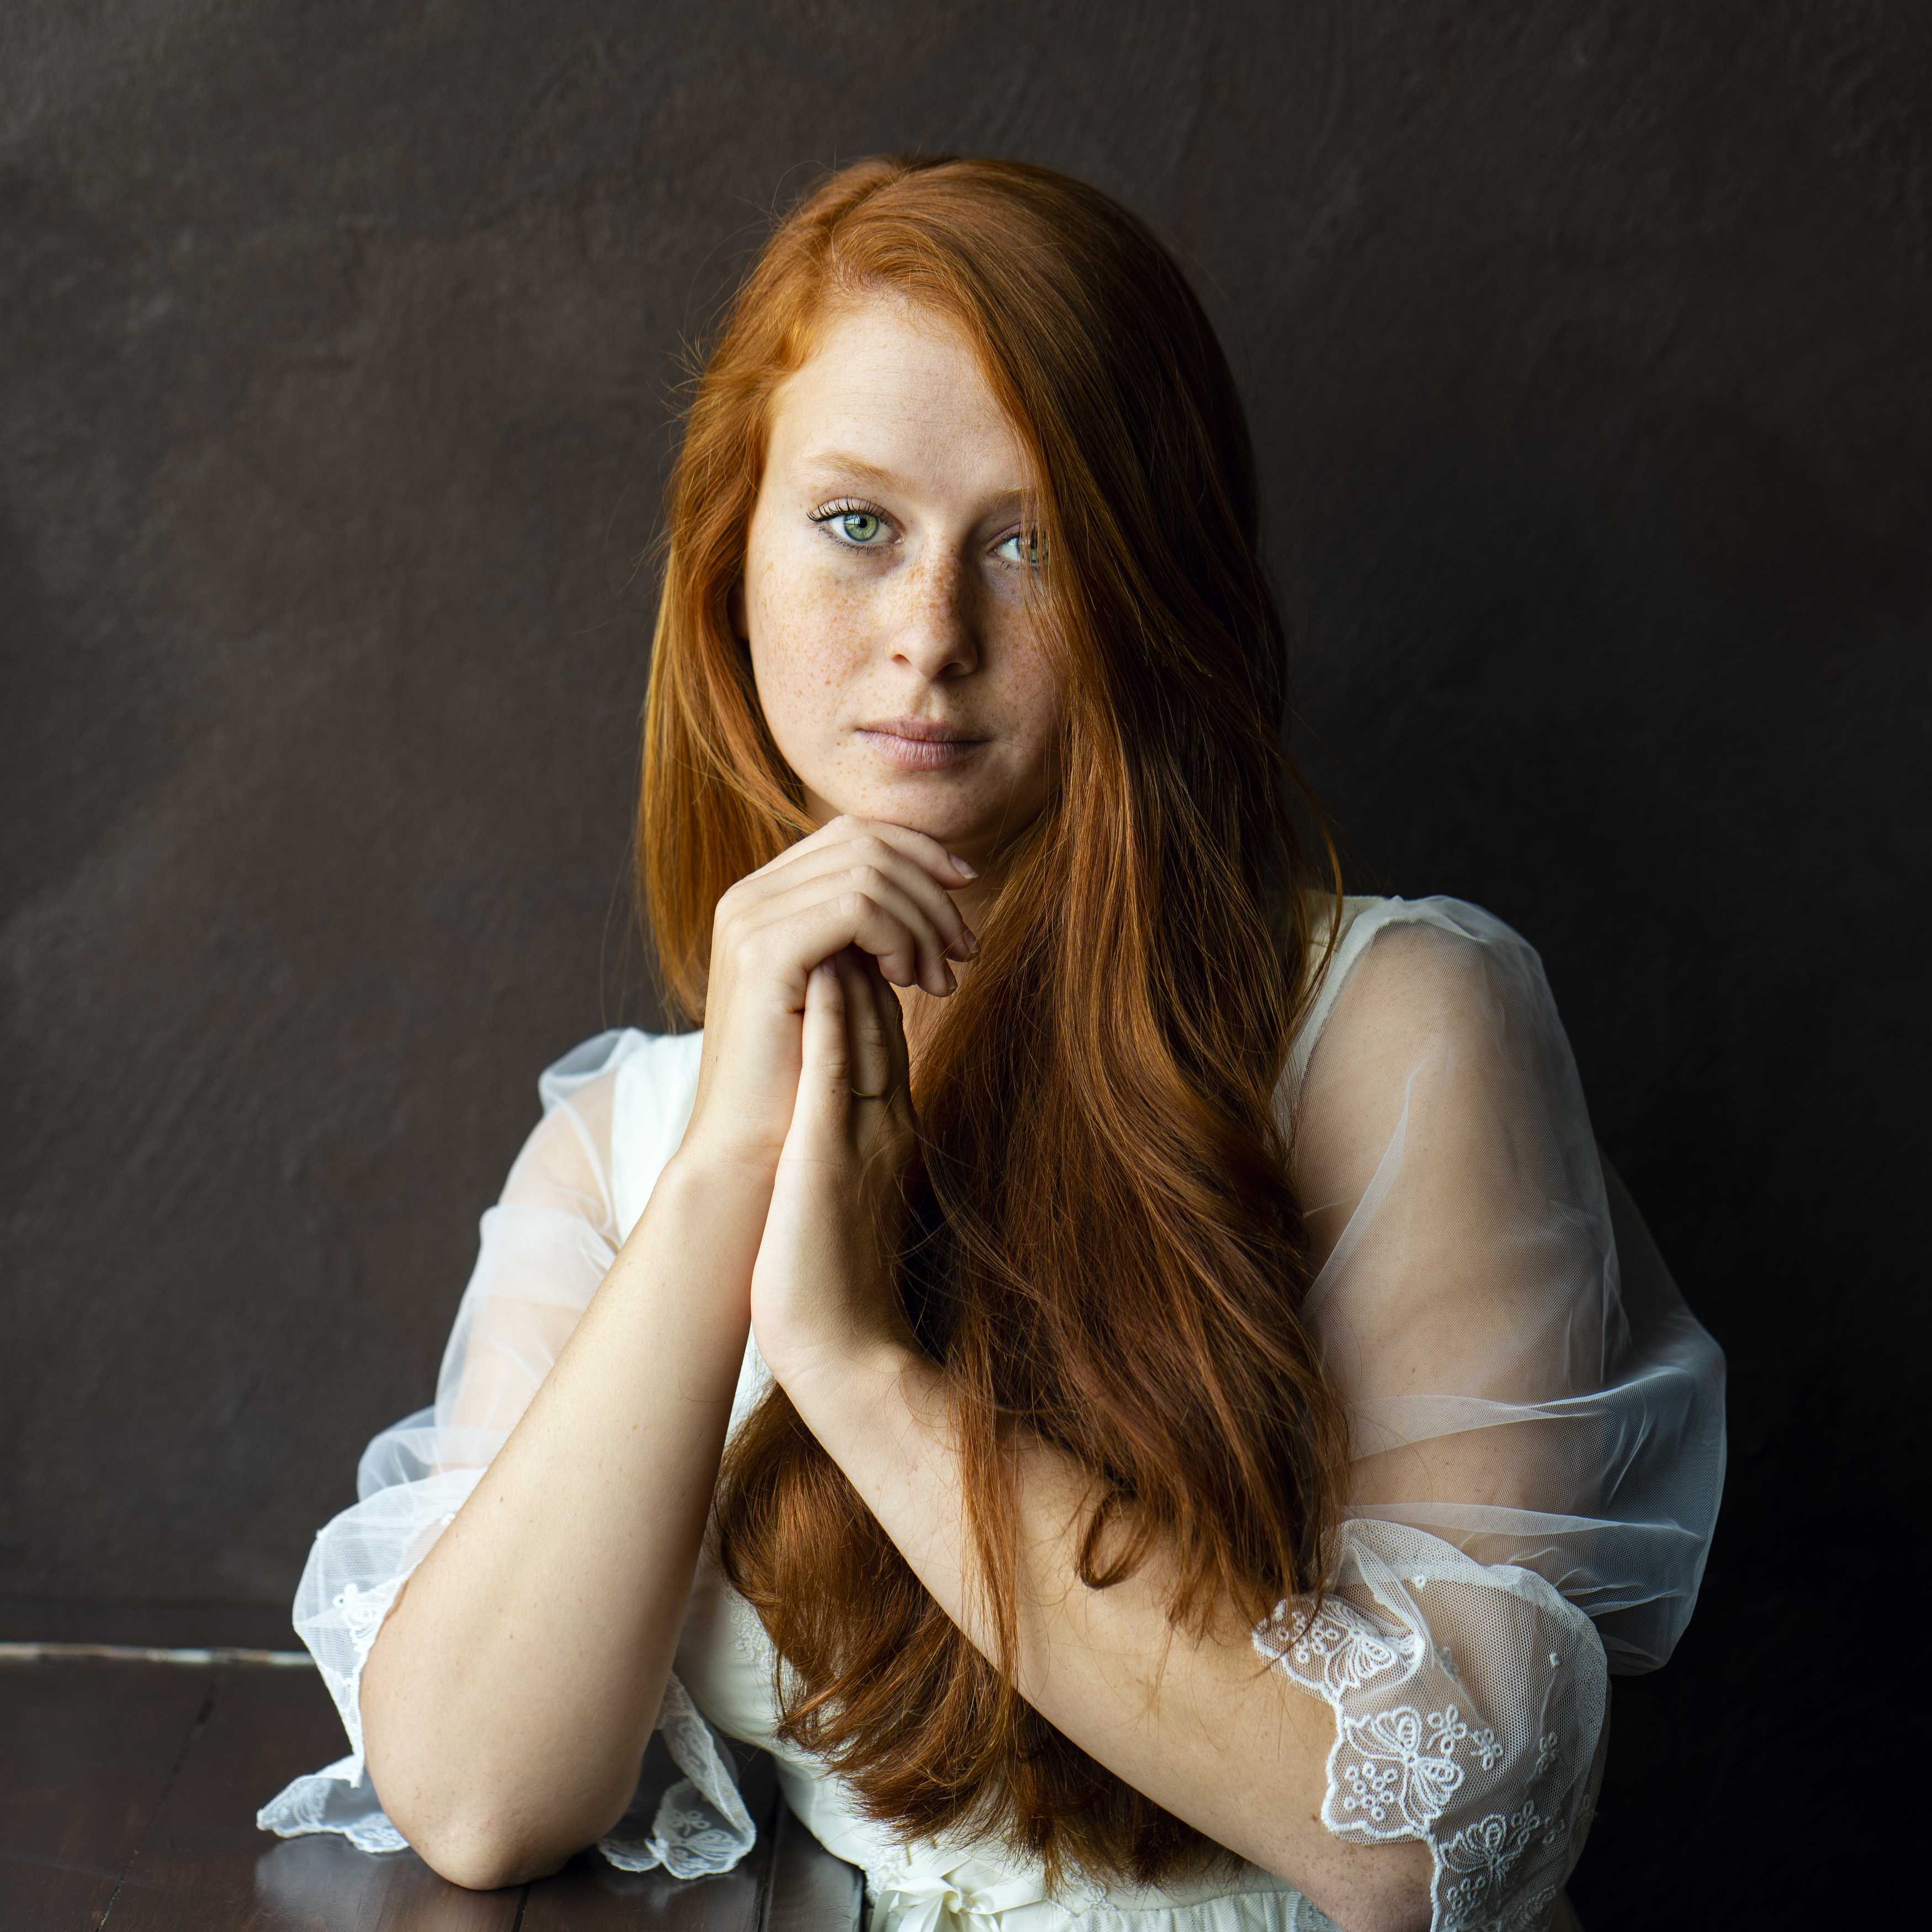 attractive, beautiful woman, beauty, dress, fashion, female, femininity, front view, grace, headshot, individuality, indoors, looking at camera, one person, portrait, pose, redhead, sitting, studio shot, young women, Alex Tsarfin